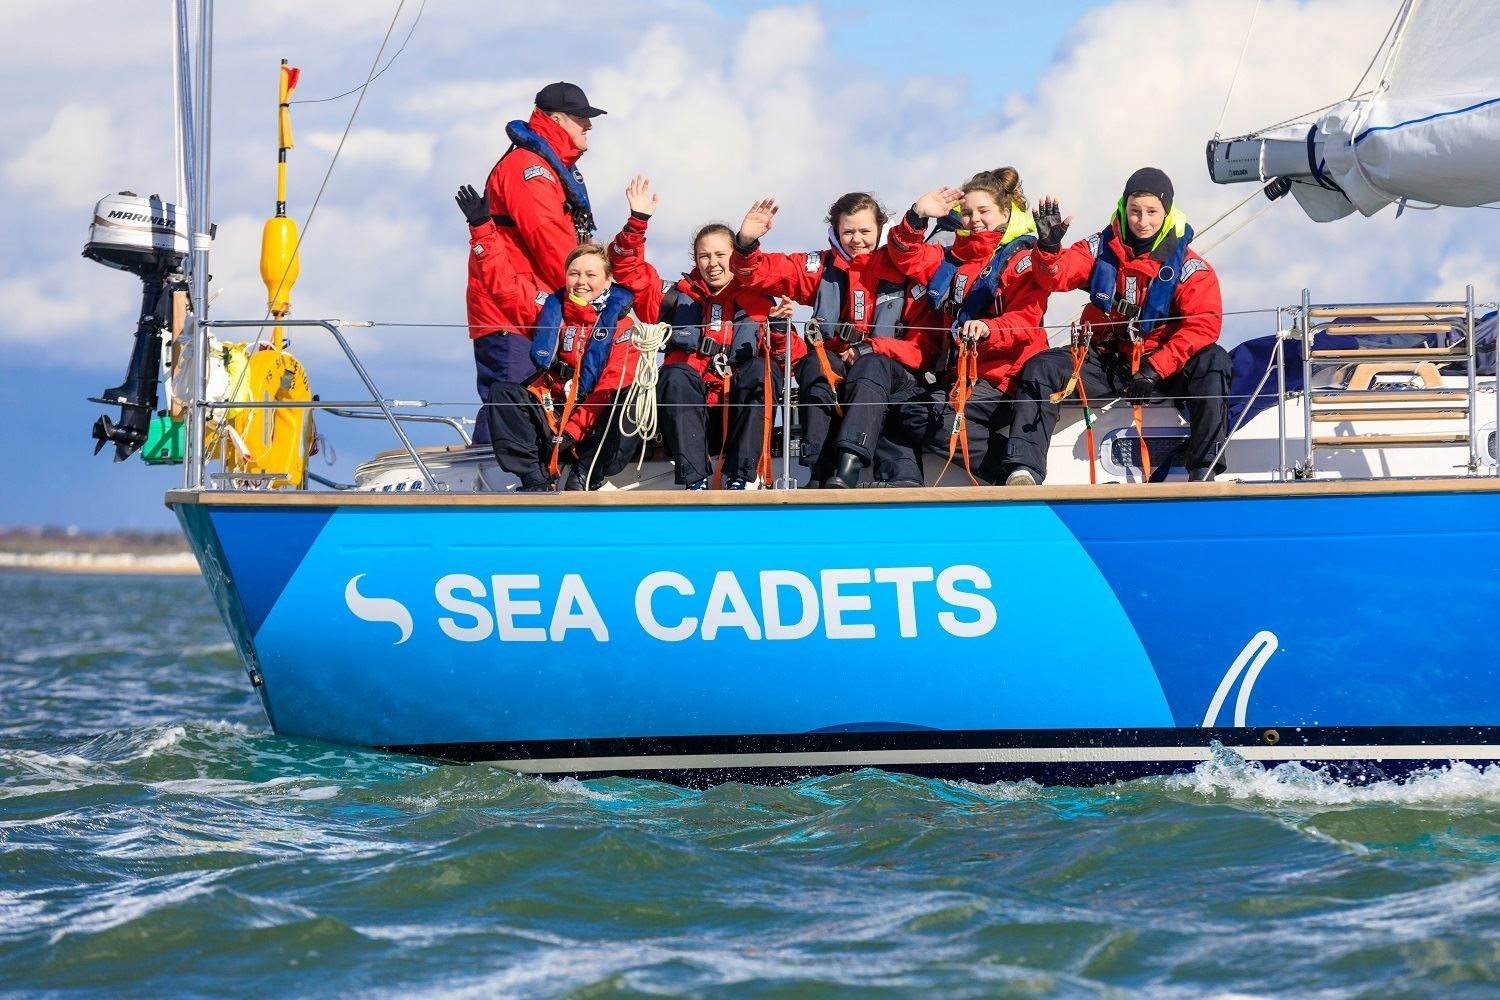 Sea Cadets on board yachts TS Sir Stelios and TS City of London on Southampton Water. Photograph: Christopher Ison